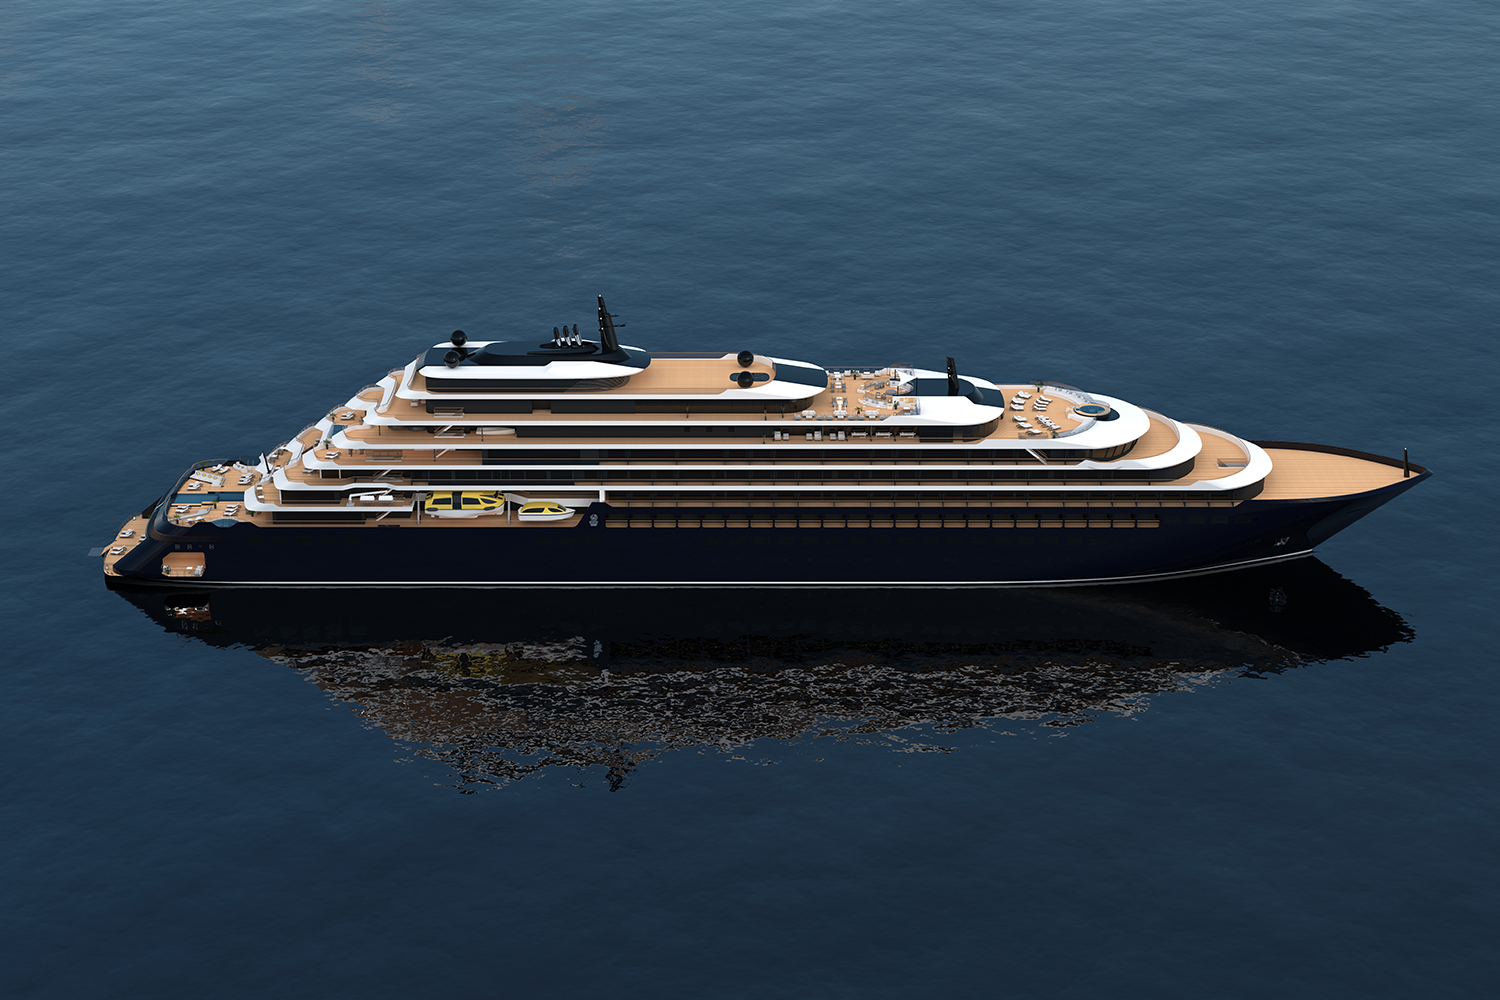 The Evrima superyacht from The Ritz-Carlton Yacht Collection